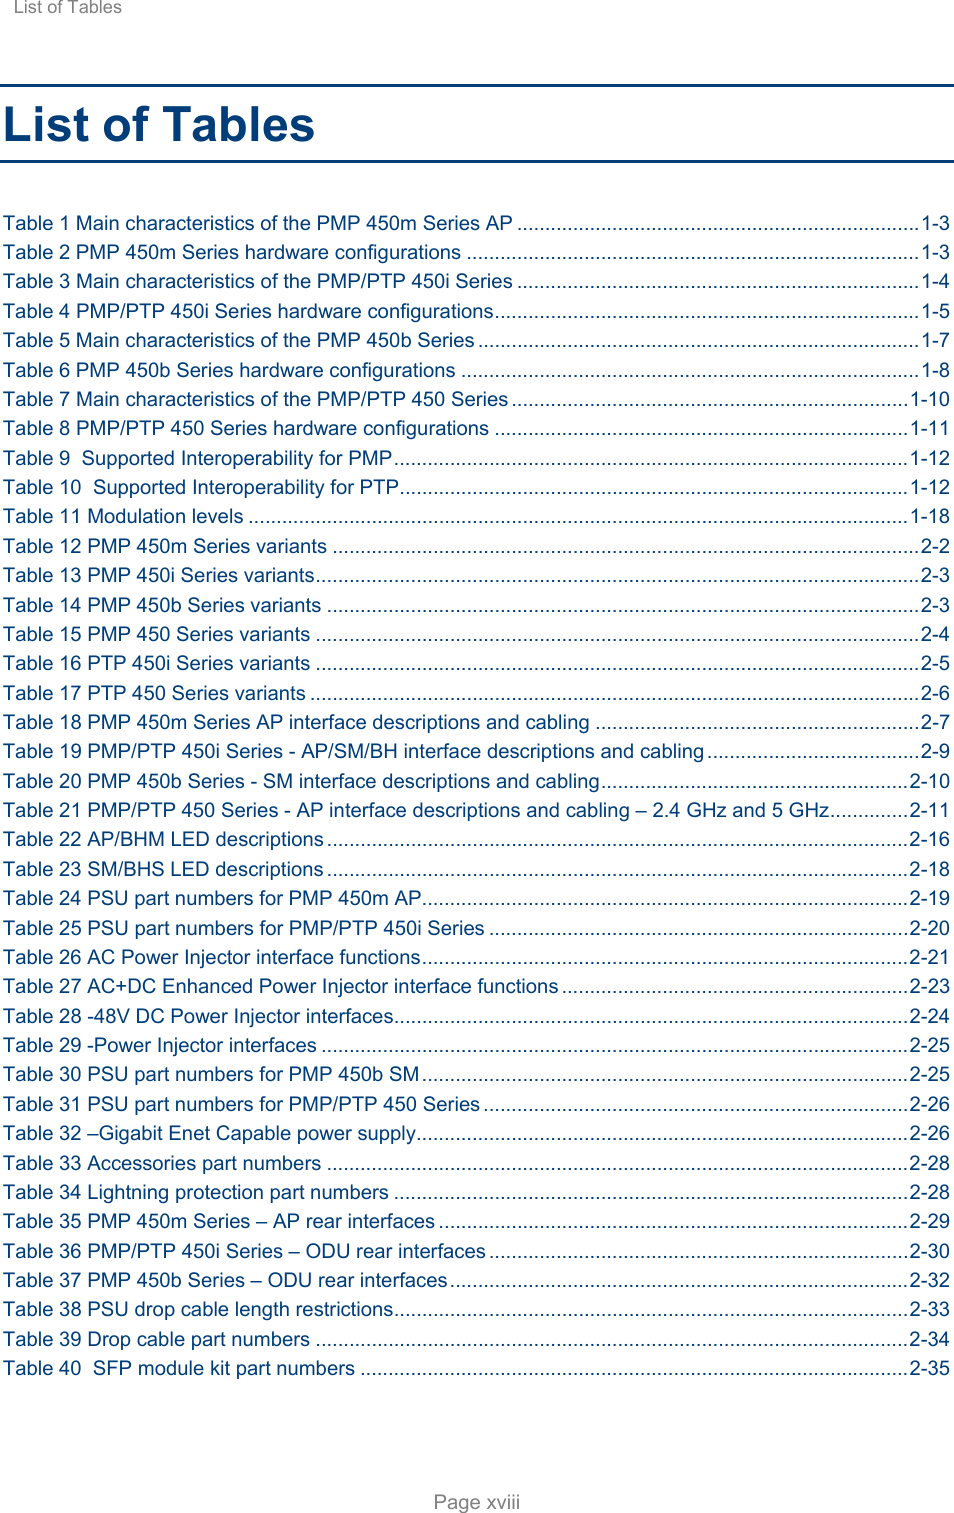 List of Tables     Page xviii List of Tables Table 1 Main characteristics of the PMP 450m Series AP ........................................................................ 1-3 Table 2 PMP 450m Series hardware configurations ................................................................................. 1-3 Table 3 Main characteristics of the PMP/PTP 450i Series ........................................................................ 1-4 Table 4 PMP/PTP 450i Series hardware configurations ............................................................................ 1-5 Table 5 Main characteristics of the PMP 450b Series ............................................................................... 1-7 Table 6 PMP 450b Series hardware configurations .................................................................................. 1-8 Table 7 Main characteristics of the PMP/PTP 450 Series ....................................................................... 1 - 1 0  Table 8 PMP/PTP 450 Series hardware configurations .......................................................................... 1-11 Table 9  Supported Interoperability for PMP ............................................................................................ 1-12 Table 10  Supported Interoperability for PTP ........................................................................................... 1-12 Table 11 Modulation levels ...................................................................................................................... 1-18 Table 12 PMP 450m Series variants ......................................................................................................... 2-2 Table 13 PMP 450i Series variants ............................................................................................................ 2-3 Table 14 PMP 450b Series variants .......................................................................................................... 2-3 Table 15 PMP 450 Series variants ............................................................................................................ 2-4 Table 16 PTP 450i Series variants ............................................................................................................ 2-5 Table 17 PTP 450 Series variants ............................................................................................................. 2-6 Table 18 PMP 450m Series AP interface descriptions and cabling .......................................................... 2-7 Table 19 PMP/PTP 450i Series - AP/SM/BH interface descriptions and cabling ...................................... 2-9 Table 20 PMP 450b Series - SM interface descriptions and cabling ....................................................... 2-10 Table 21 PMP/PTP 450 Series - AP interface descriptions and cabling – 2.4 GHz and 5 GHz .............. 2-11 Table 22 AP/BHM LED descriptions ........................................................................................................ 2-16 Table 23 SM/BHS LED descriptions ........................................................................................................ 2-18 Table 24 PSU part numbers for PMP 450m AP....................................................................................... 2-19 Table 25 PSU part numbers for PMP/PTP 450i Series ........................................................................... 2-20 Table 26 AC Power Injector interface functions ....................................................................................... 2-21 Table 27 AC+DC Enhanced Power Injector interface functions .............................................................. 2-23 Table 28 -48V DC Power Injector interfaces ............................................................................................ 2-24 Table 29 -Power Injector interfaces ......................................................................................................... 2-25 Table 30 PSU part numbers for PMP 450b SM ....................................................................................... 2-25 Table 31 PSU part numbers for PMP/PTP 450 Series ............................................................................ 2-26 Table 32 –Gigabit Enet Capable power supply........................................................................................ 2-26 Table 33 Accessories part numbers ........................................................................................................ 2-28 Table 34 Lightning protection part numbers ............................................................................................ 2-28 Table 35 PMP 450m Series – AP rear interfaces .................................................................................... 2-29 Table 36 PMP/PTP 450i Series – ODU rear interfaces ........................................................................... 2 - 3 0  Table 37 PMP 450b Series – ODU rear interfaces .................................................................................. 2-32 Table 38 PSU drop cable length restrictions ............................................................................................ 2-33 Table 39 Drop cable part numbers .......................................................................................................... 2-34 Table 40  SFP module kit part numbers .................................................................................................. 2-35 